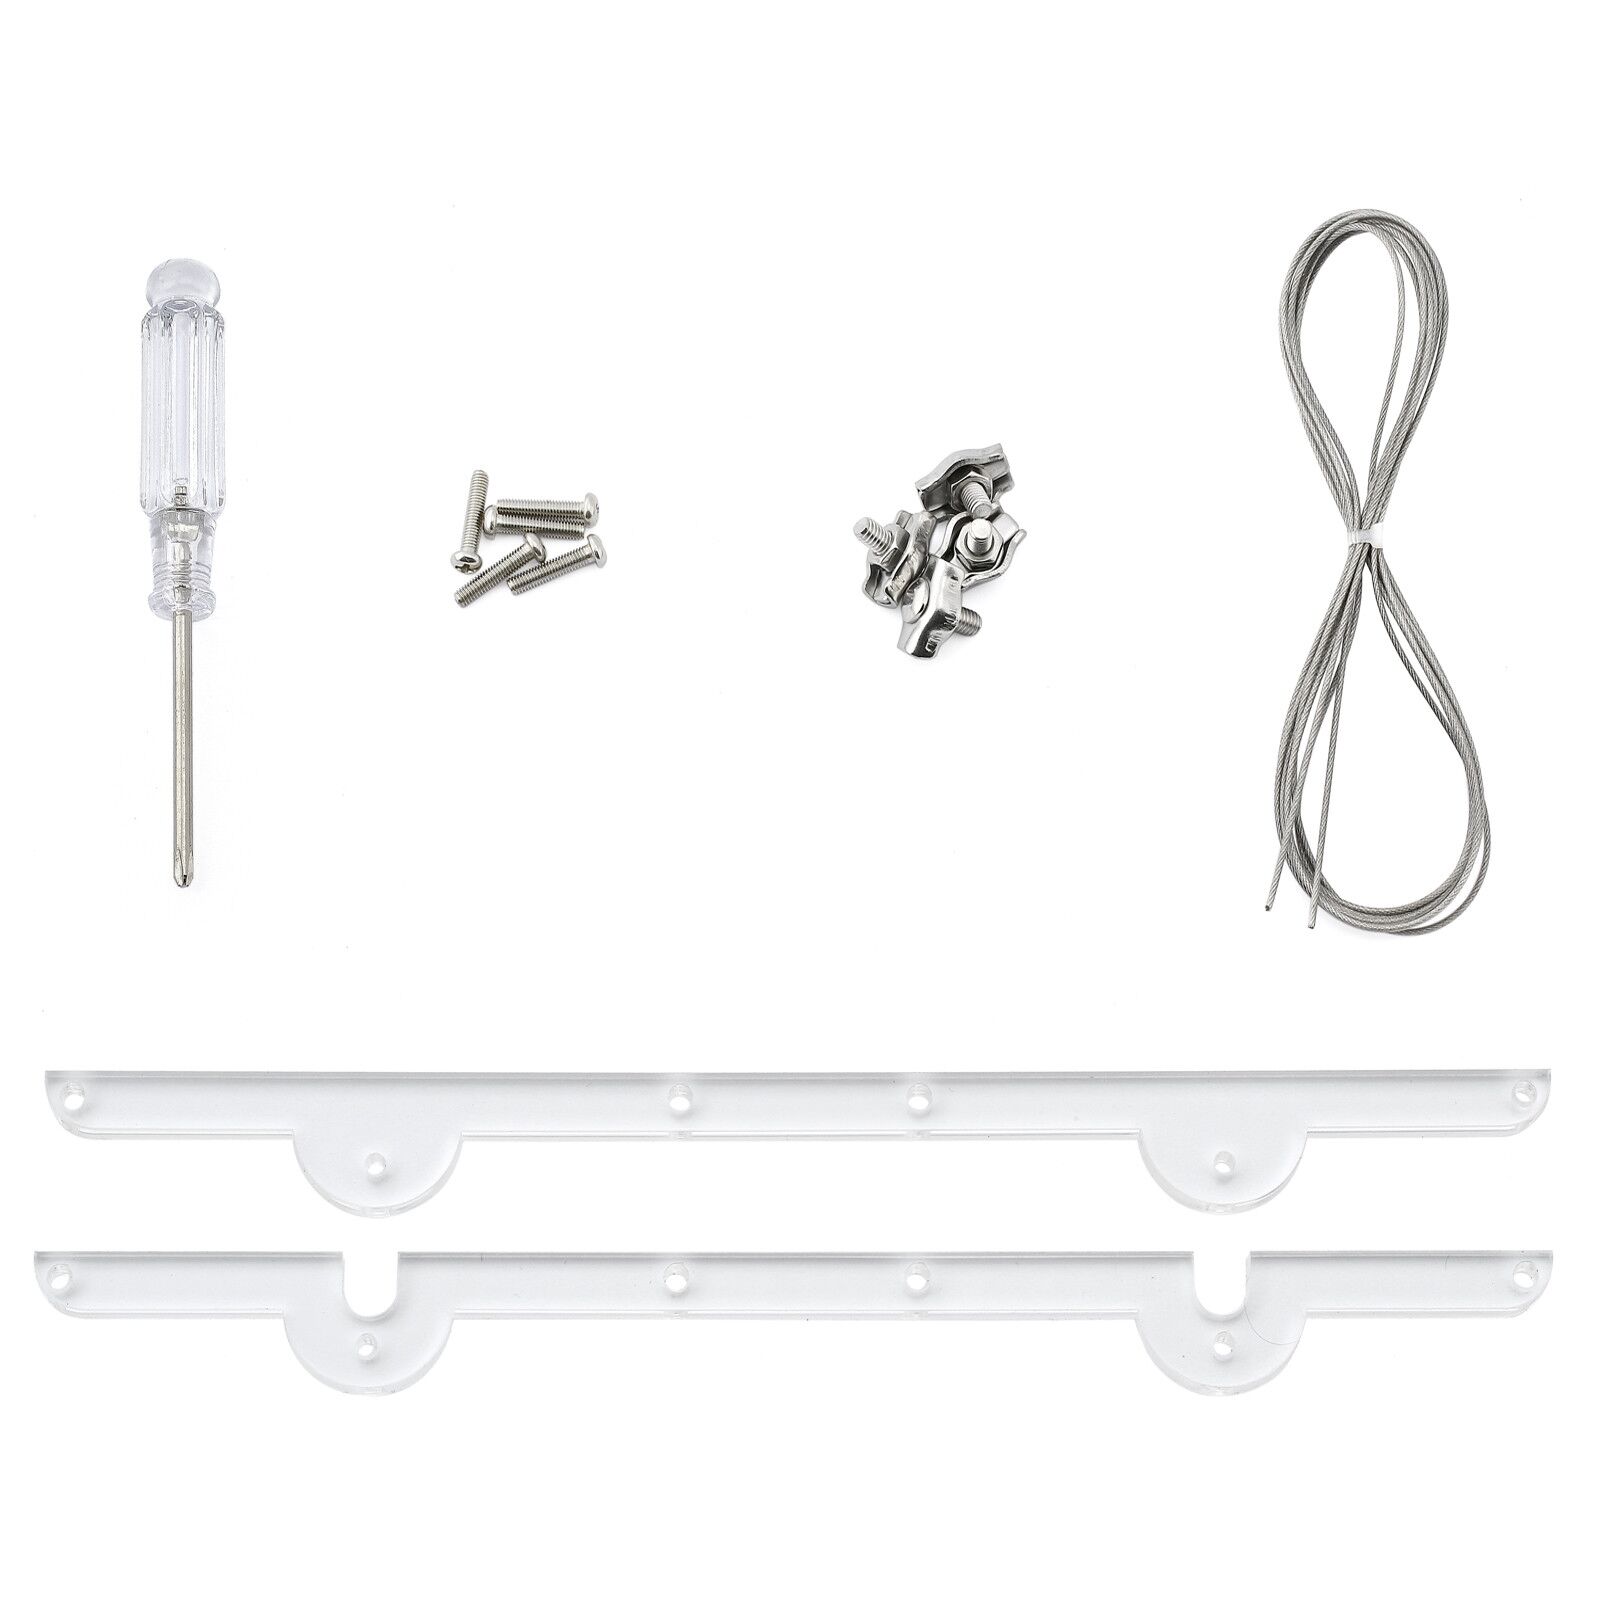 Chihiros - Cable Suspension Kit - A-plus-Series